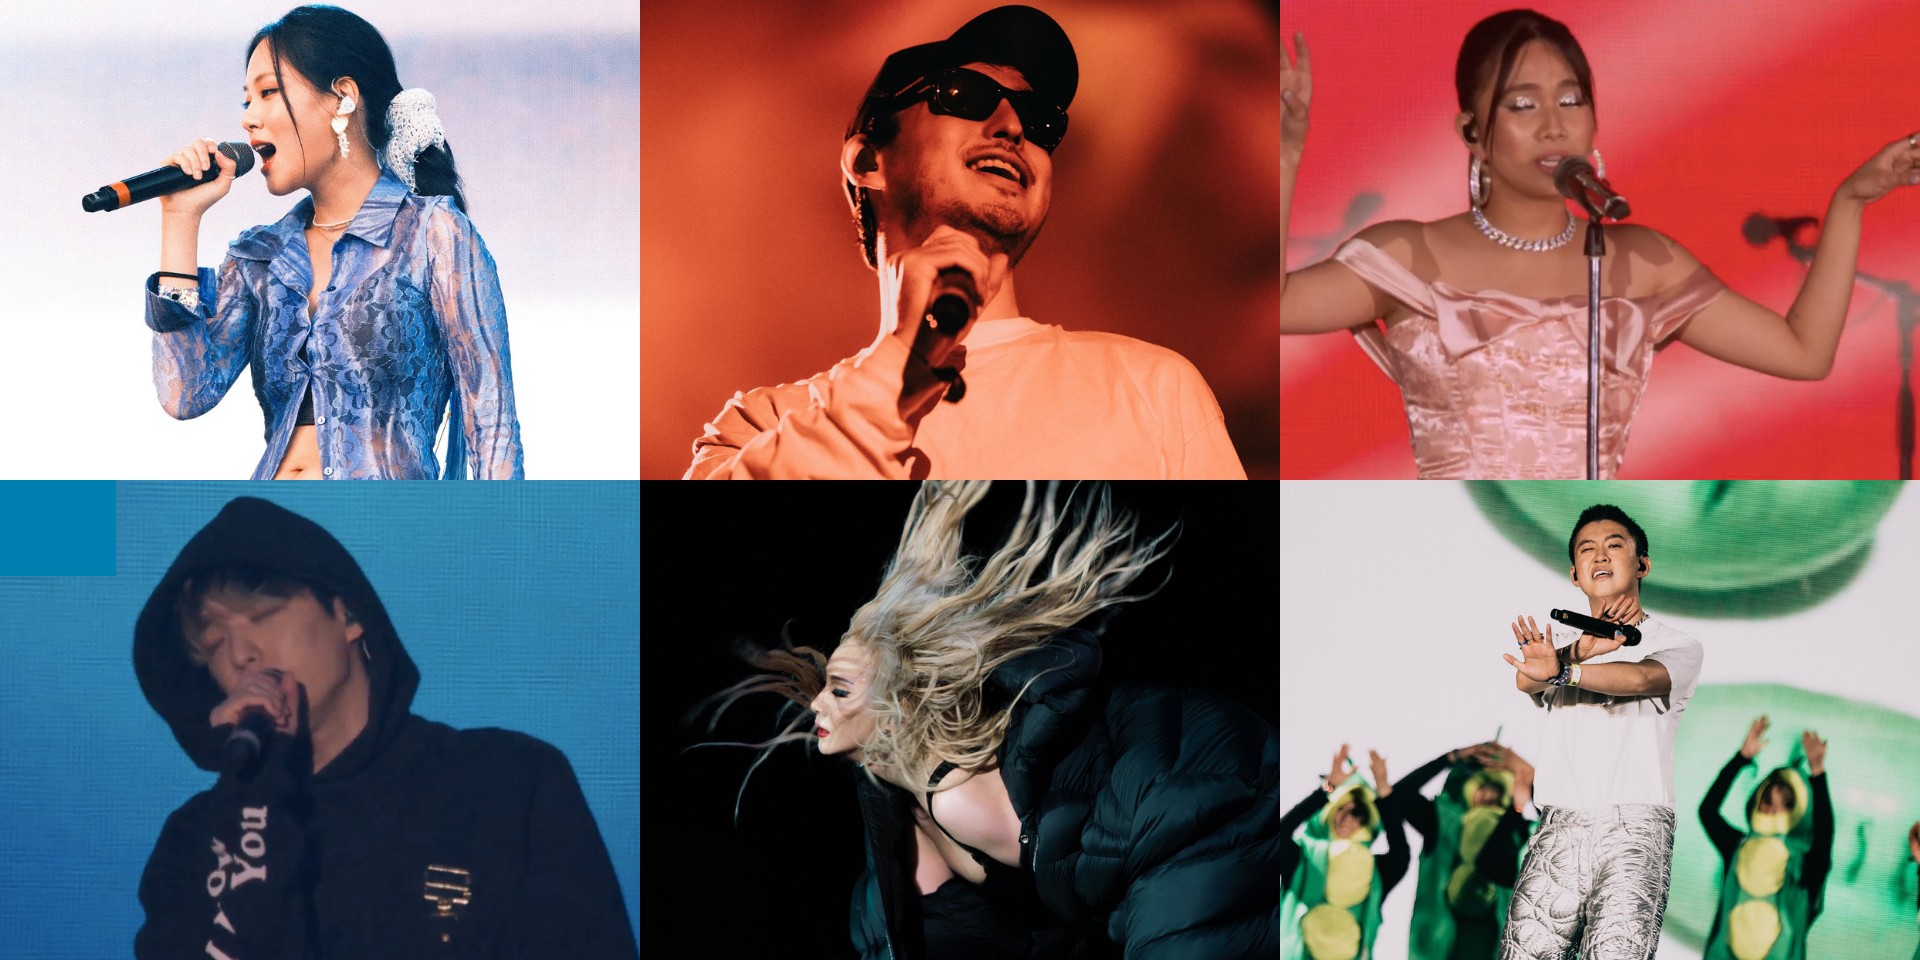 14 highlights from Head In The Clouds 2021: Joji, NIKI, CL, Rich Brian, eaJ, BIBI, and more